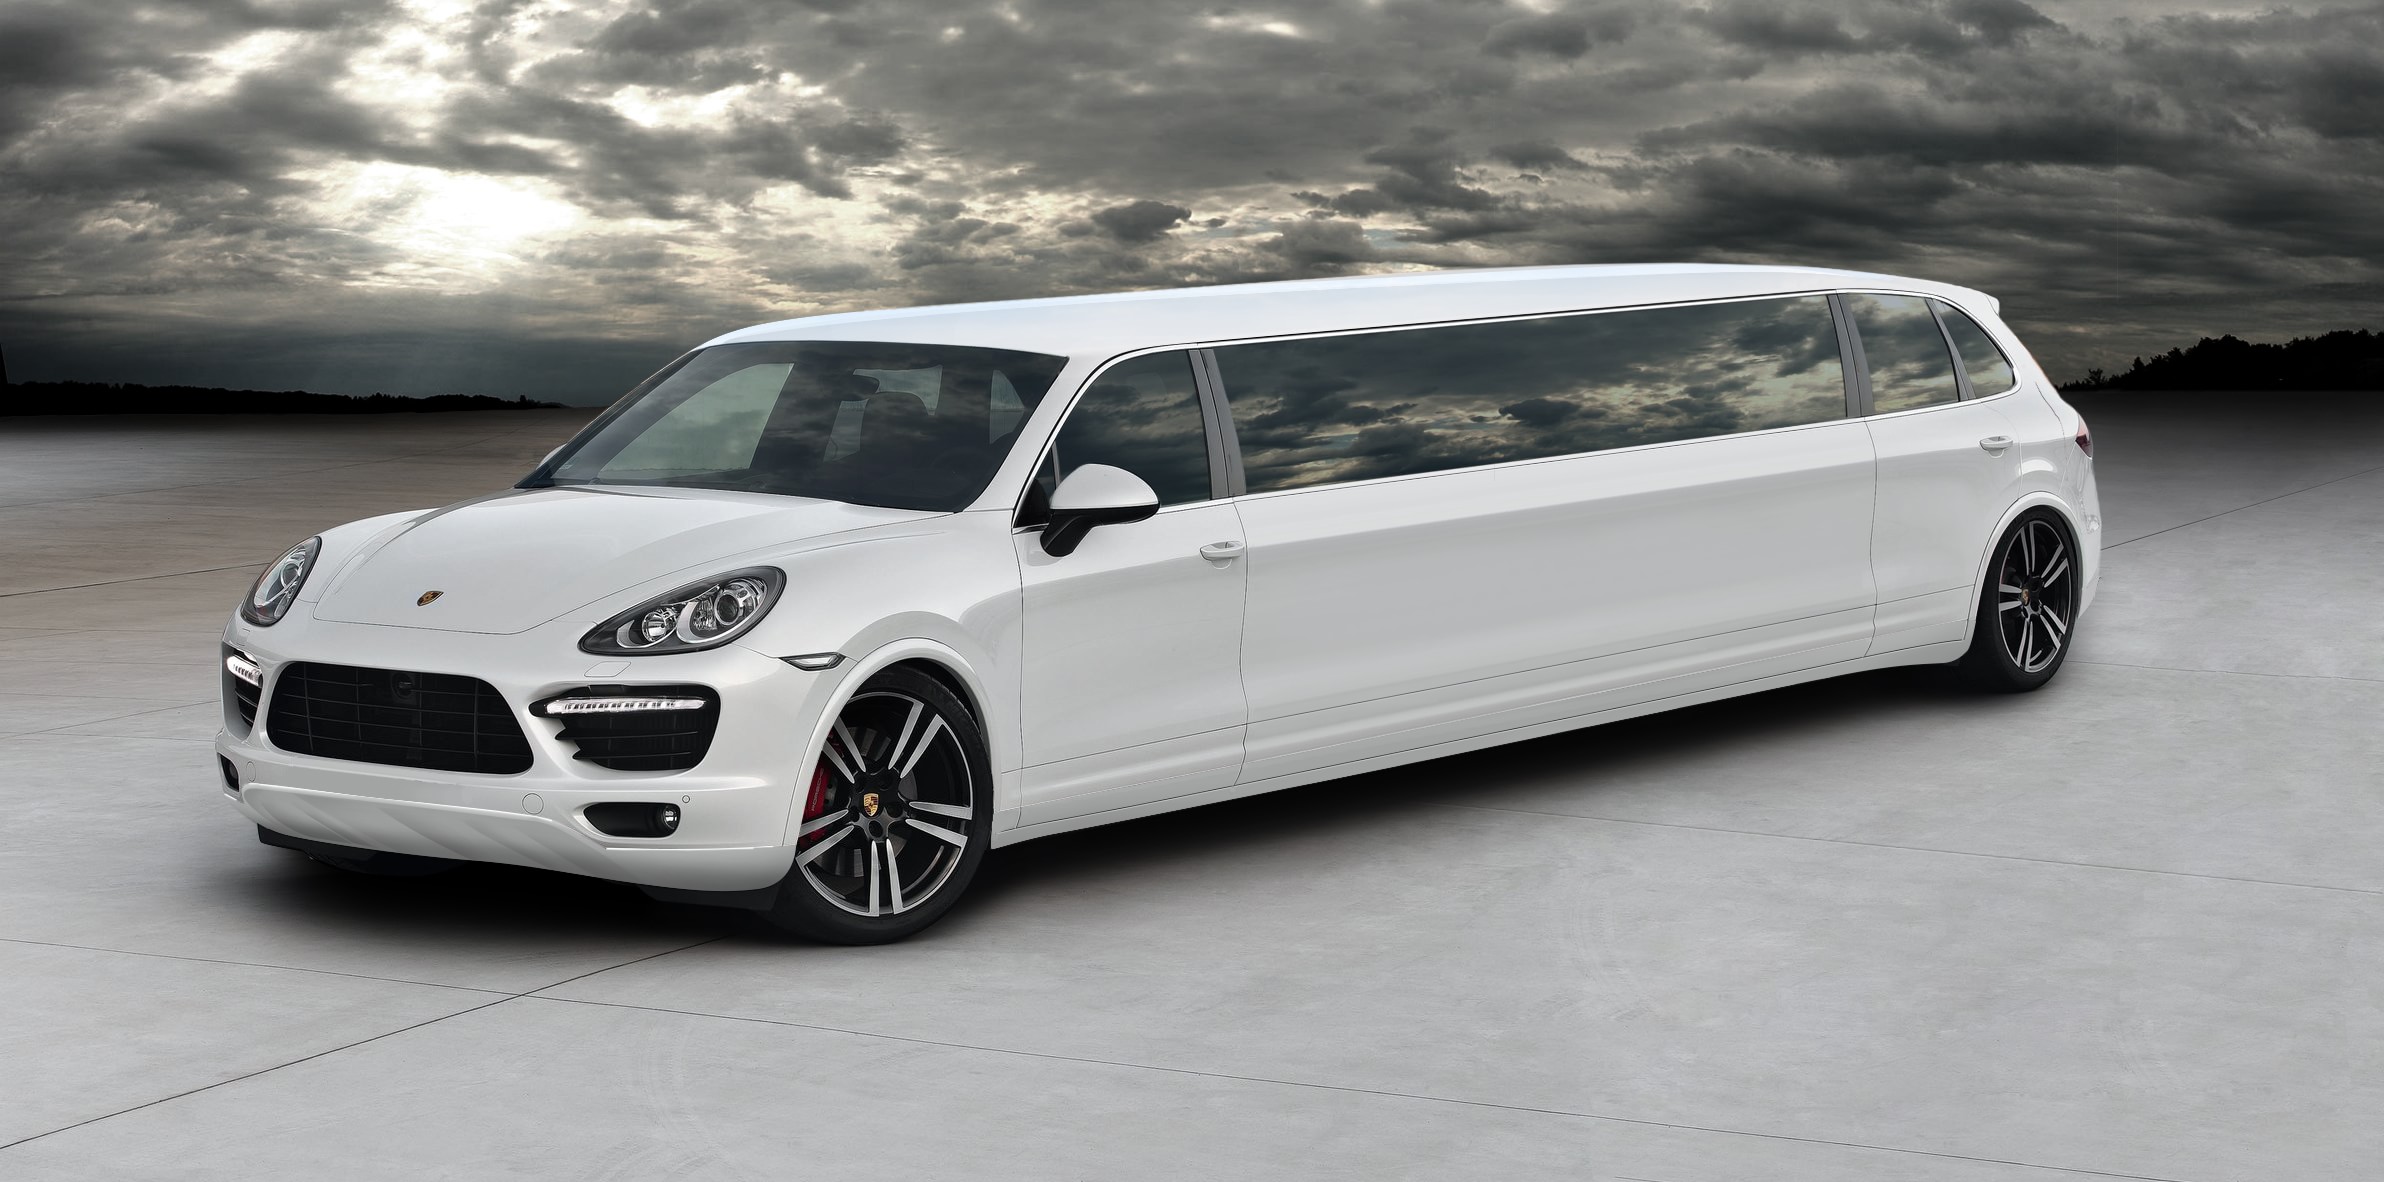 Limo hire in Slough